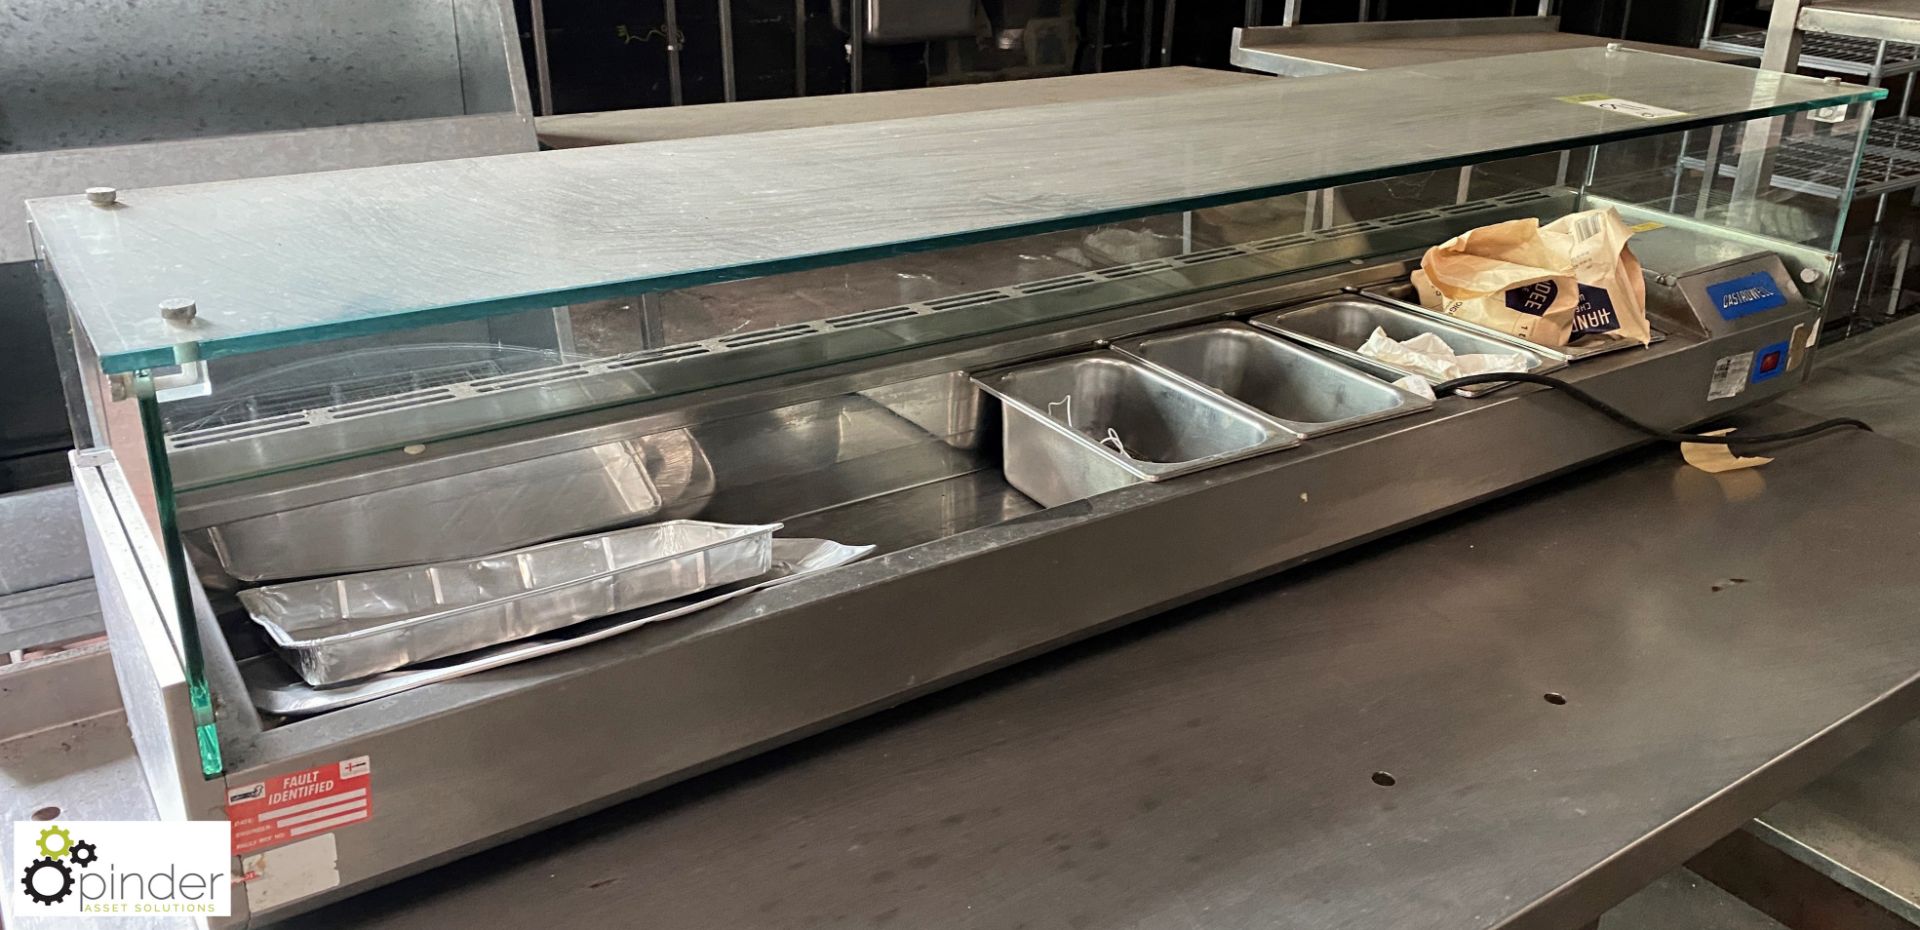 Gastrowell heated Ingredients Servery Unit, 1600mm x 340mm x 370mm - Image 2 of 5